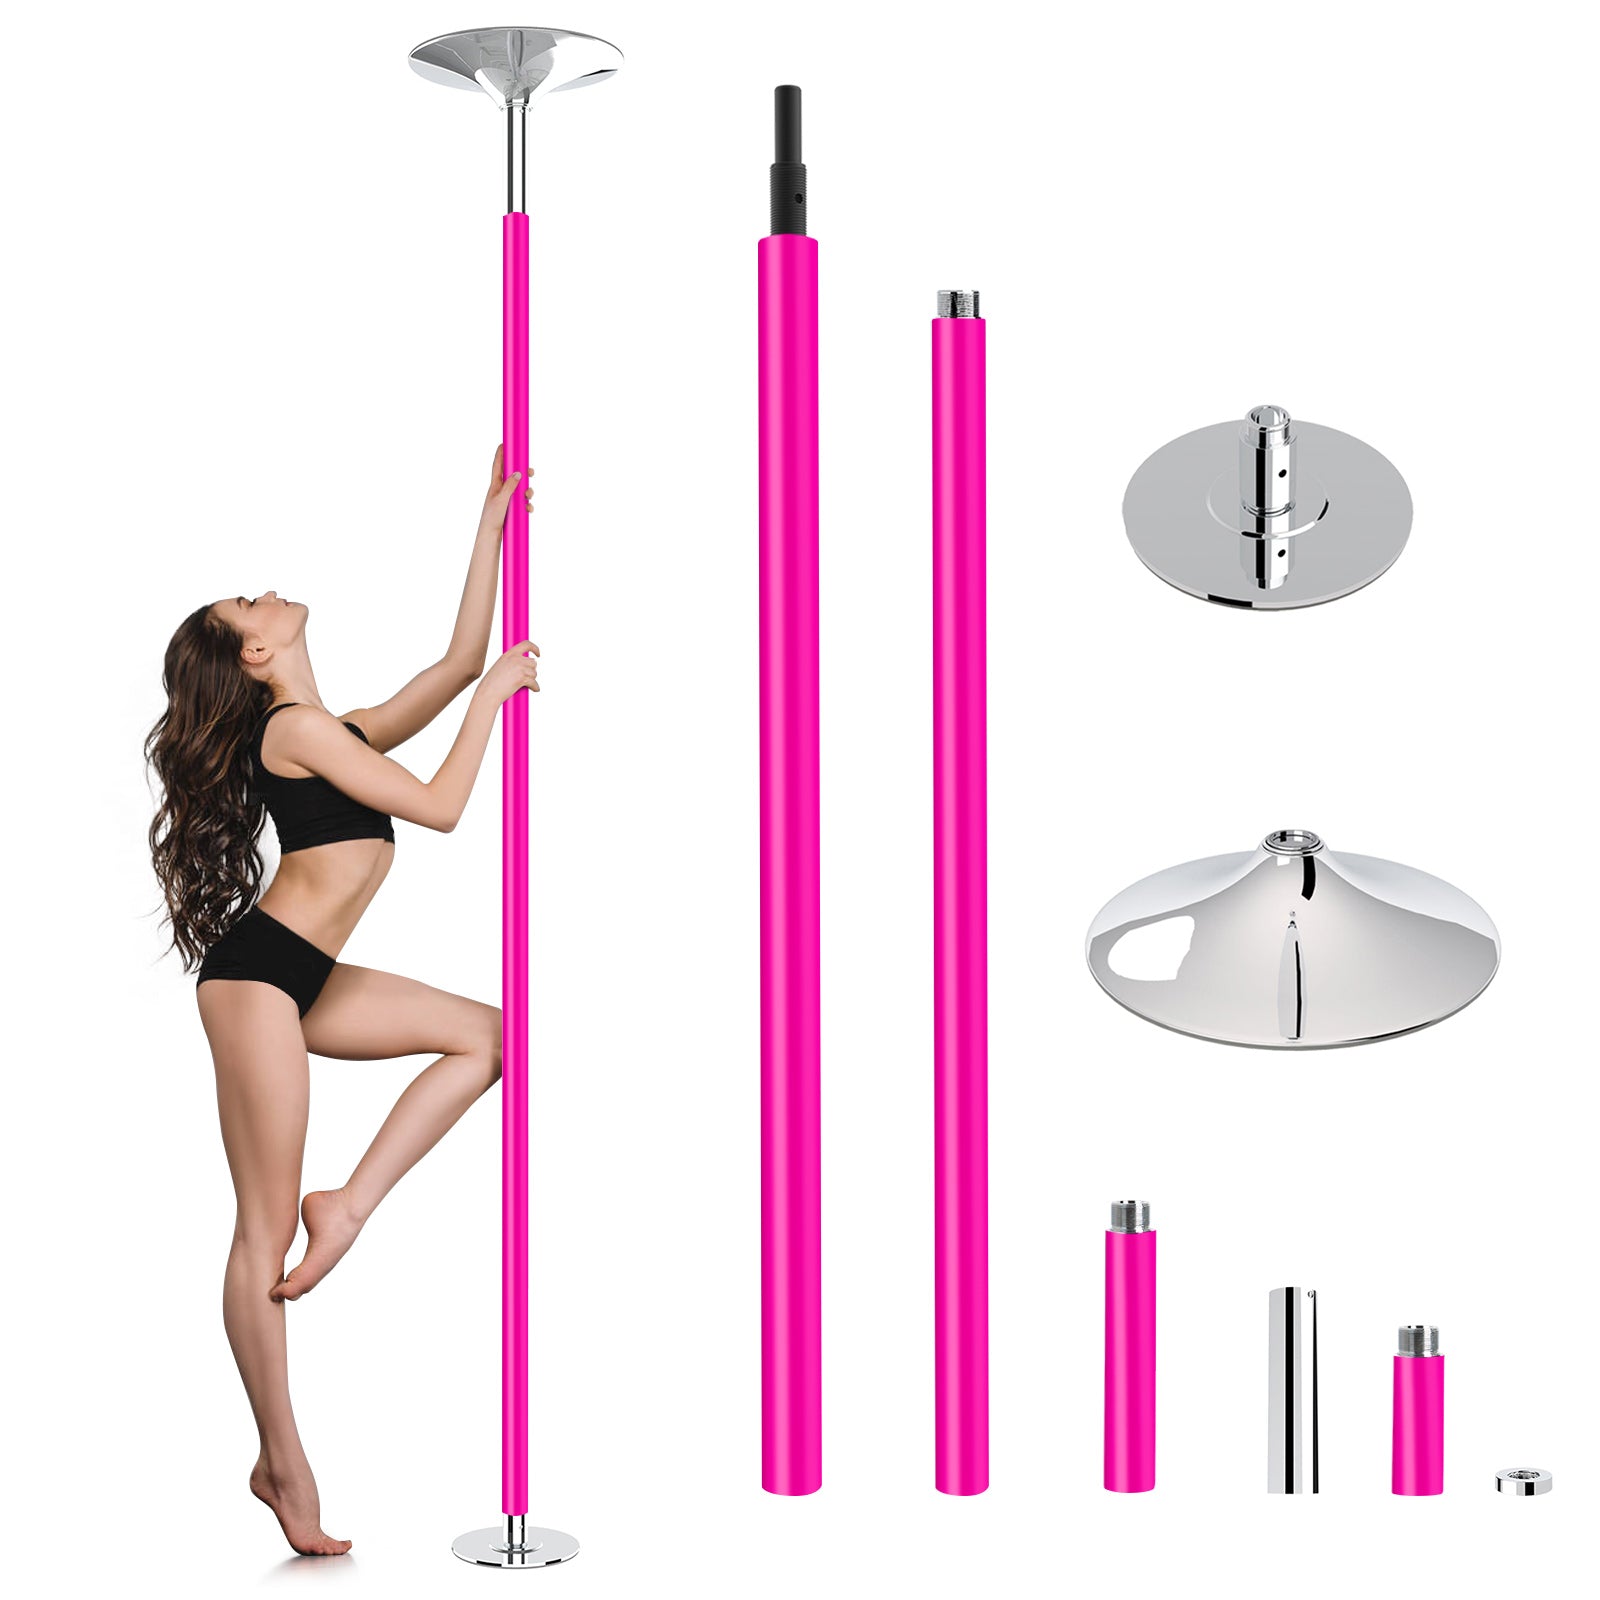 Silicone-Dance-Pole-Bar-Adjustable-Height-223-5-274-5cm-Static-and-Rotating-Maximum-Load-200-Kg-for-Dance-Exercise-Fitness-Silicone-Dance-Pole-Bar